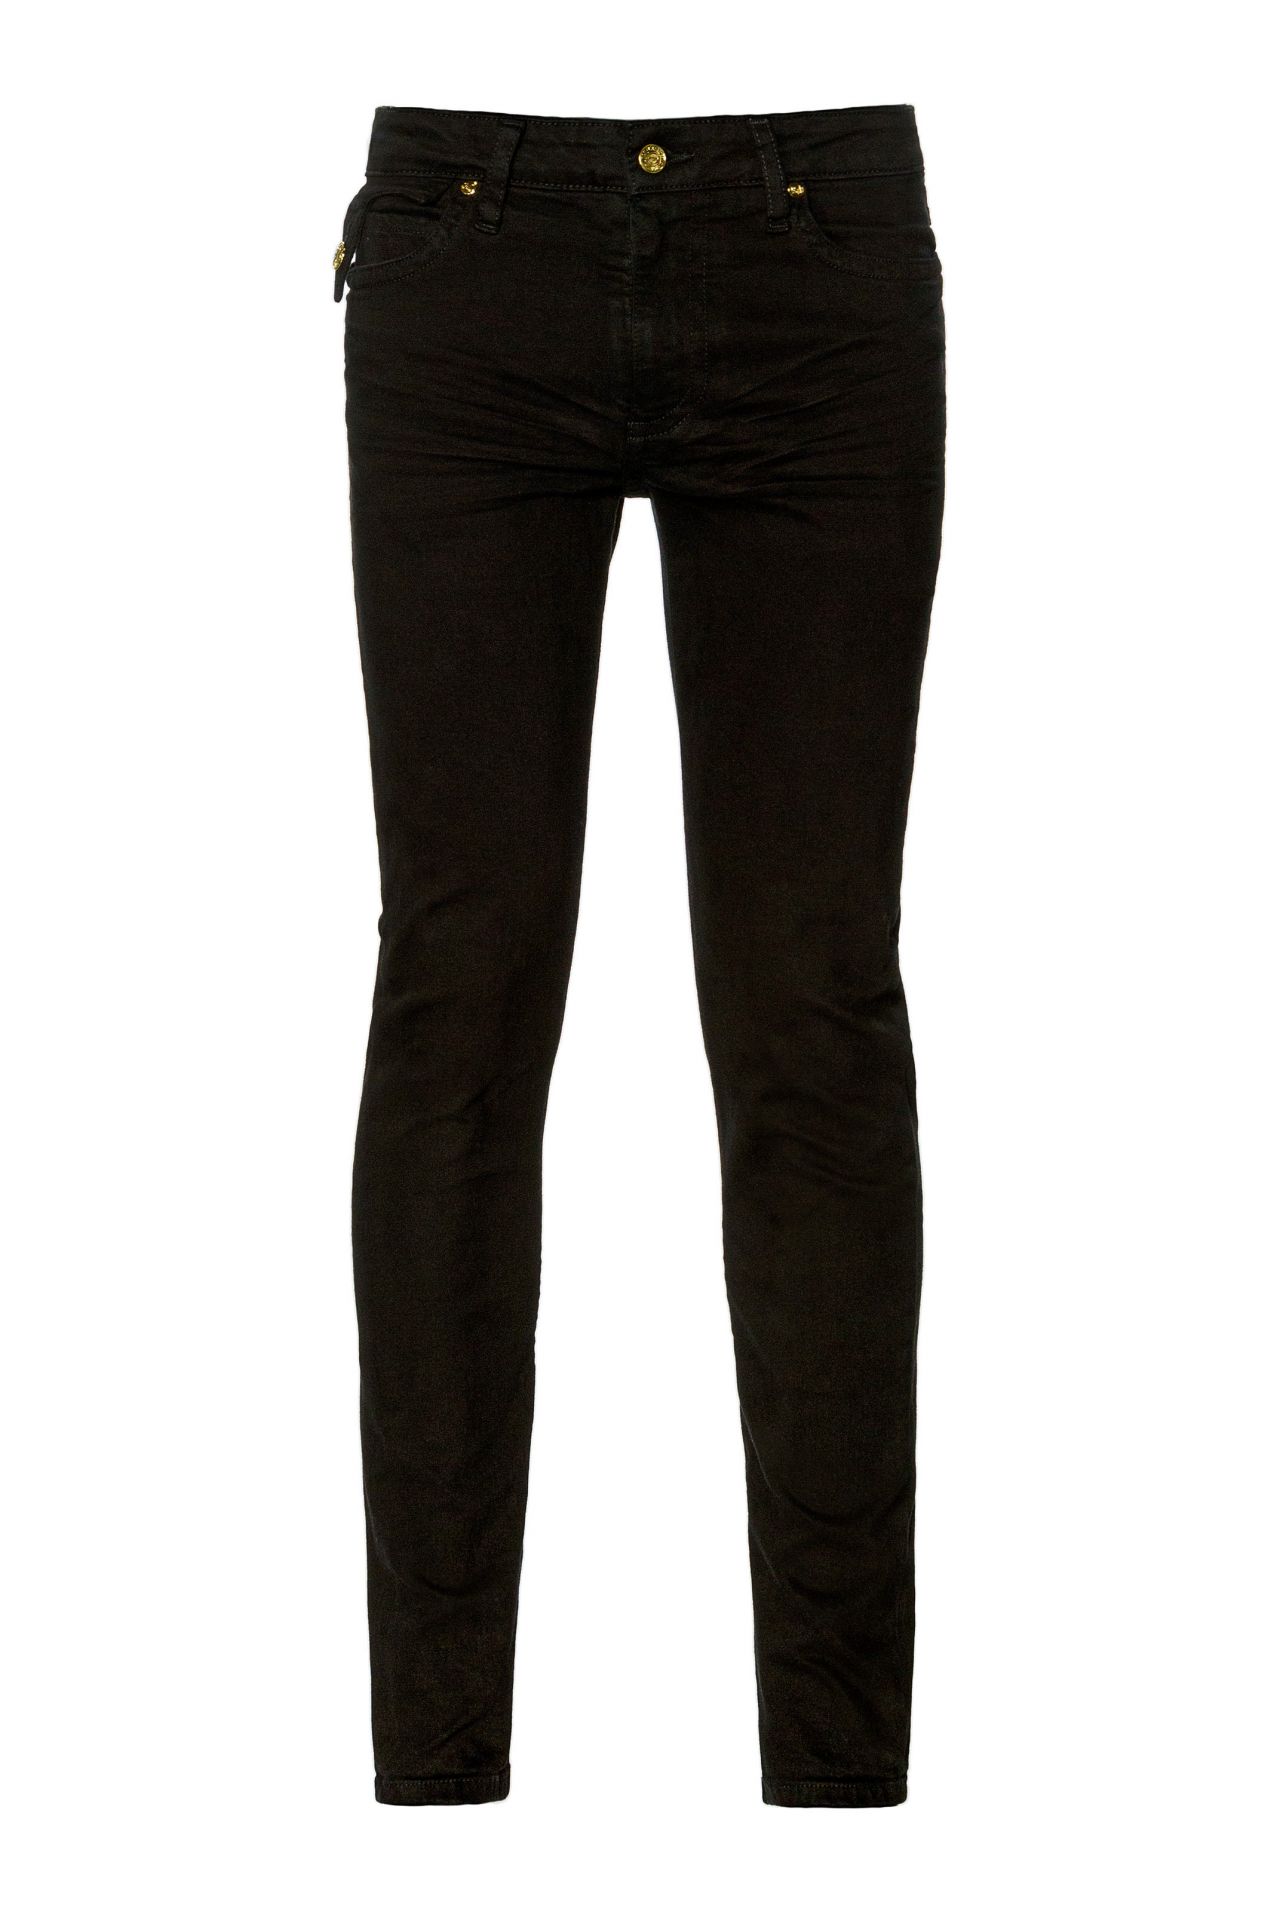 KILLER FLAP MENS SKINNY JEANS IN BLACK WITH GOLD WINGS